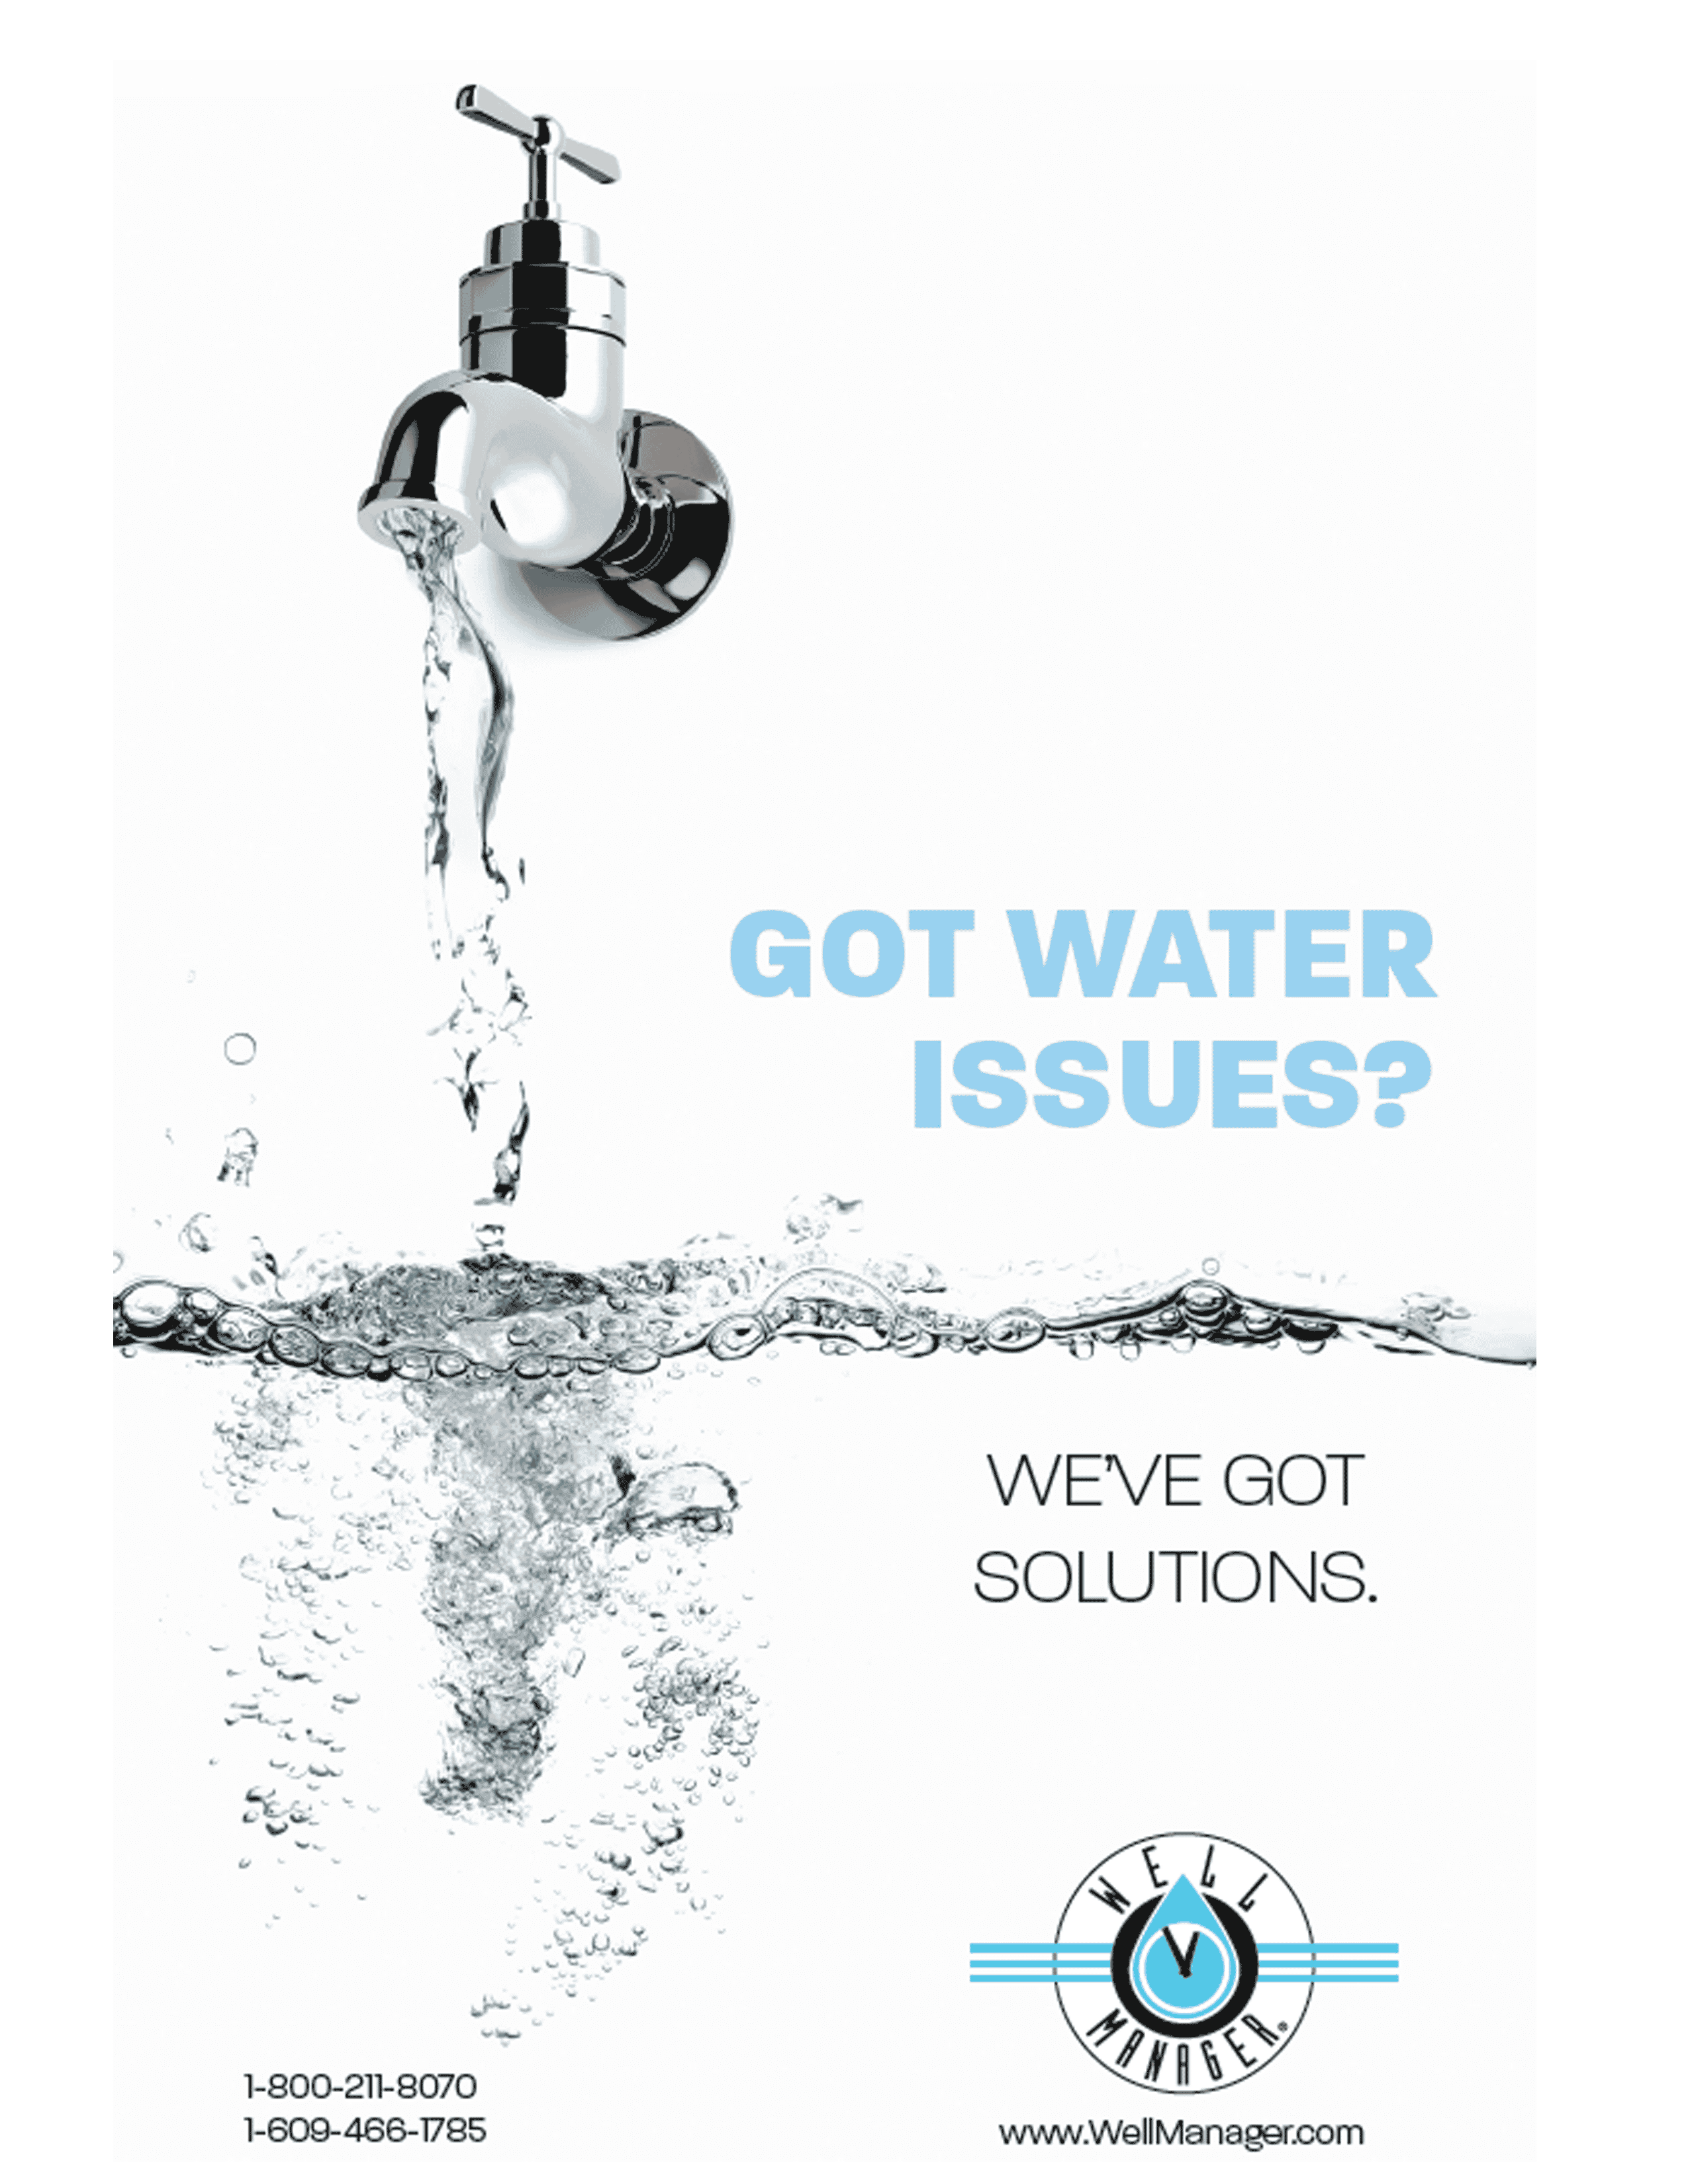 Scan of Front Page of "Got Water Issues" Well Manager Equipment Brochure